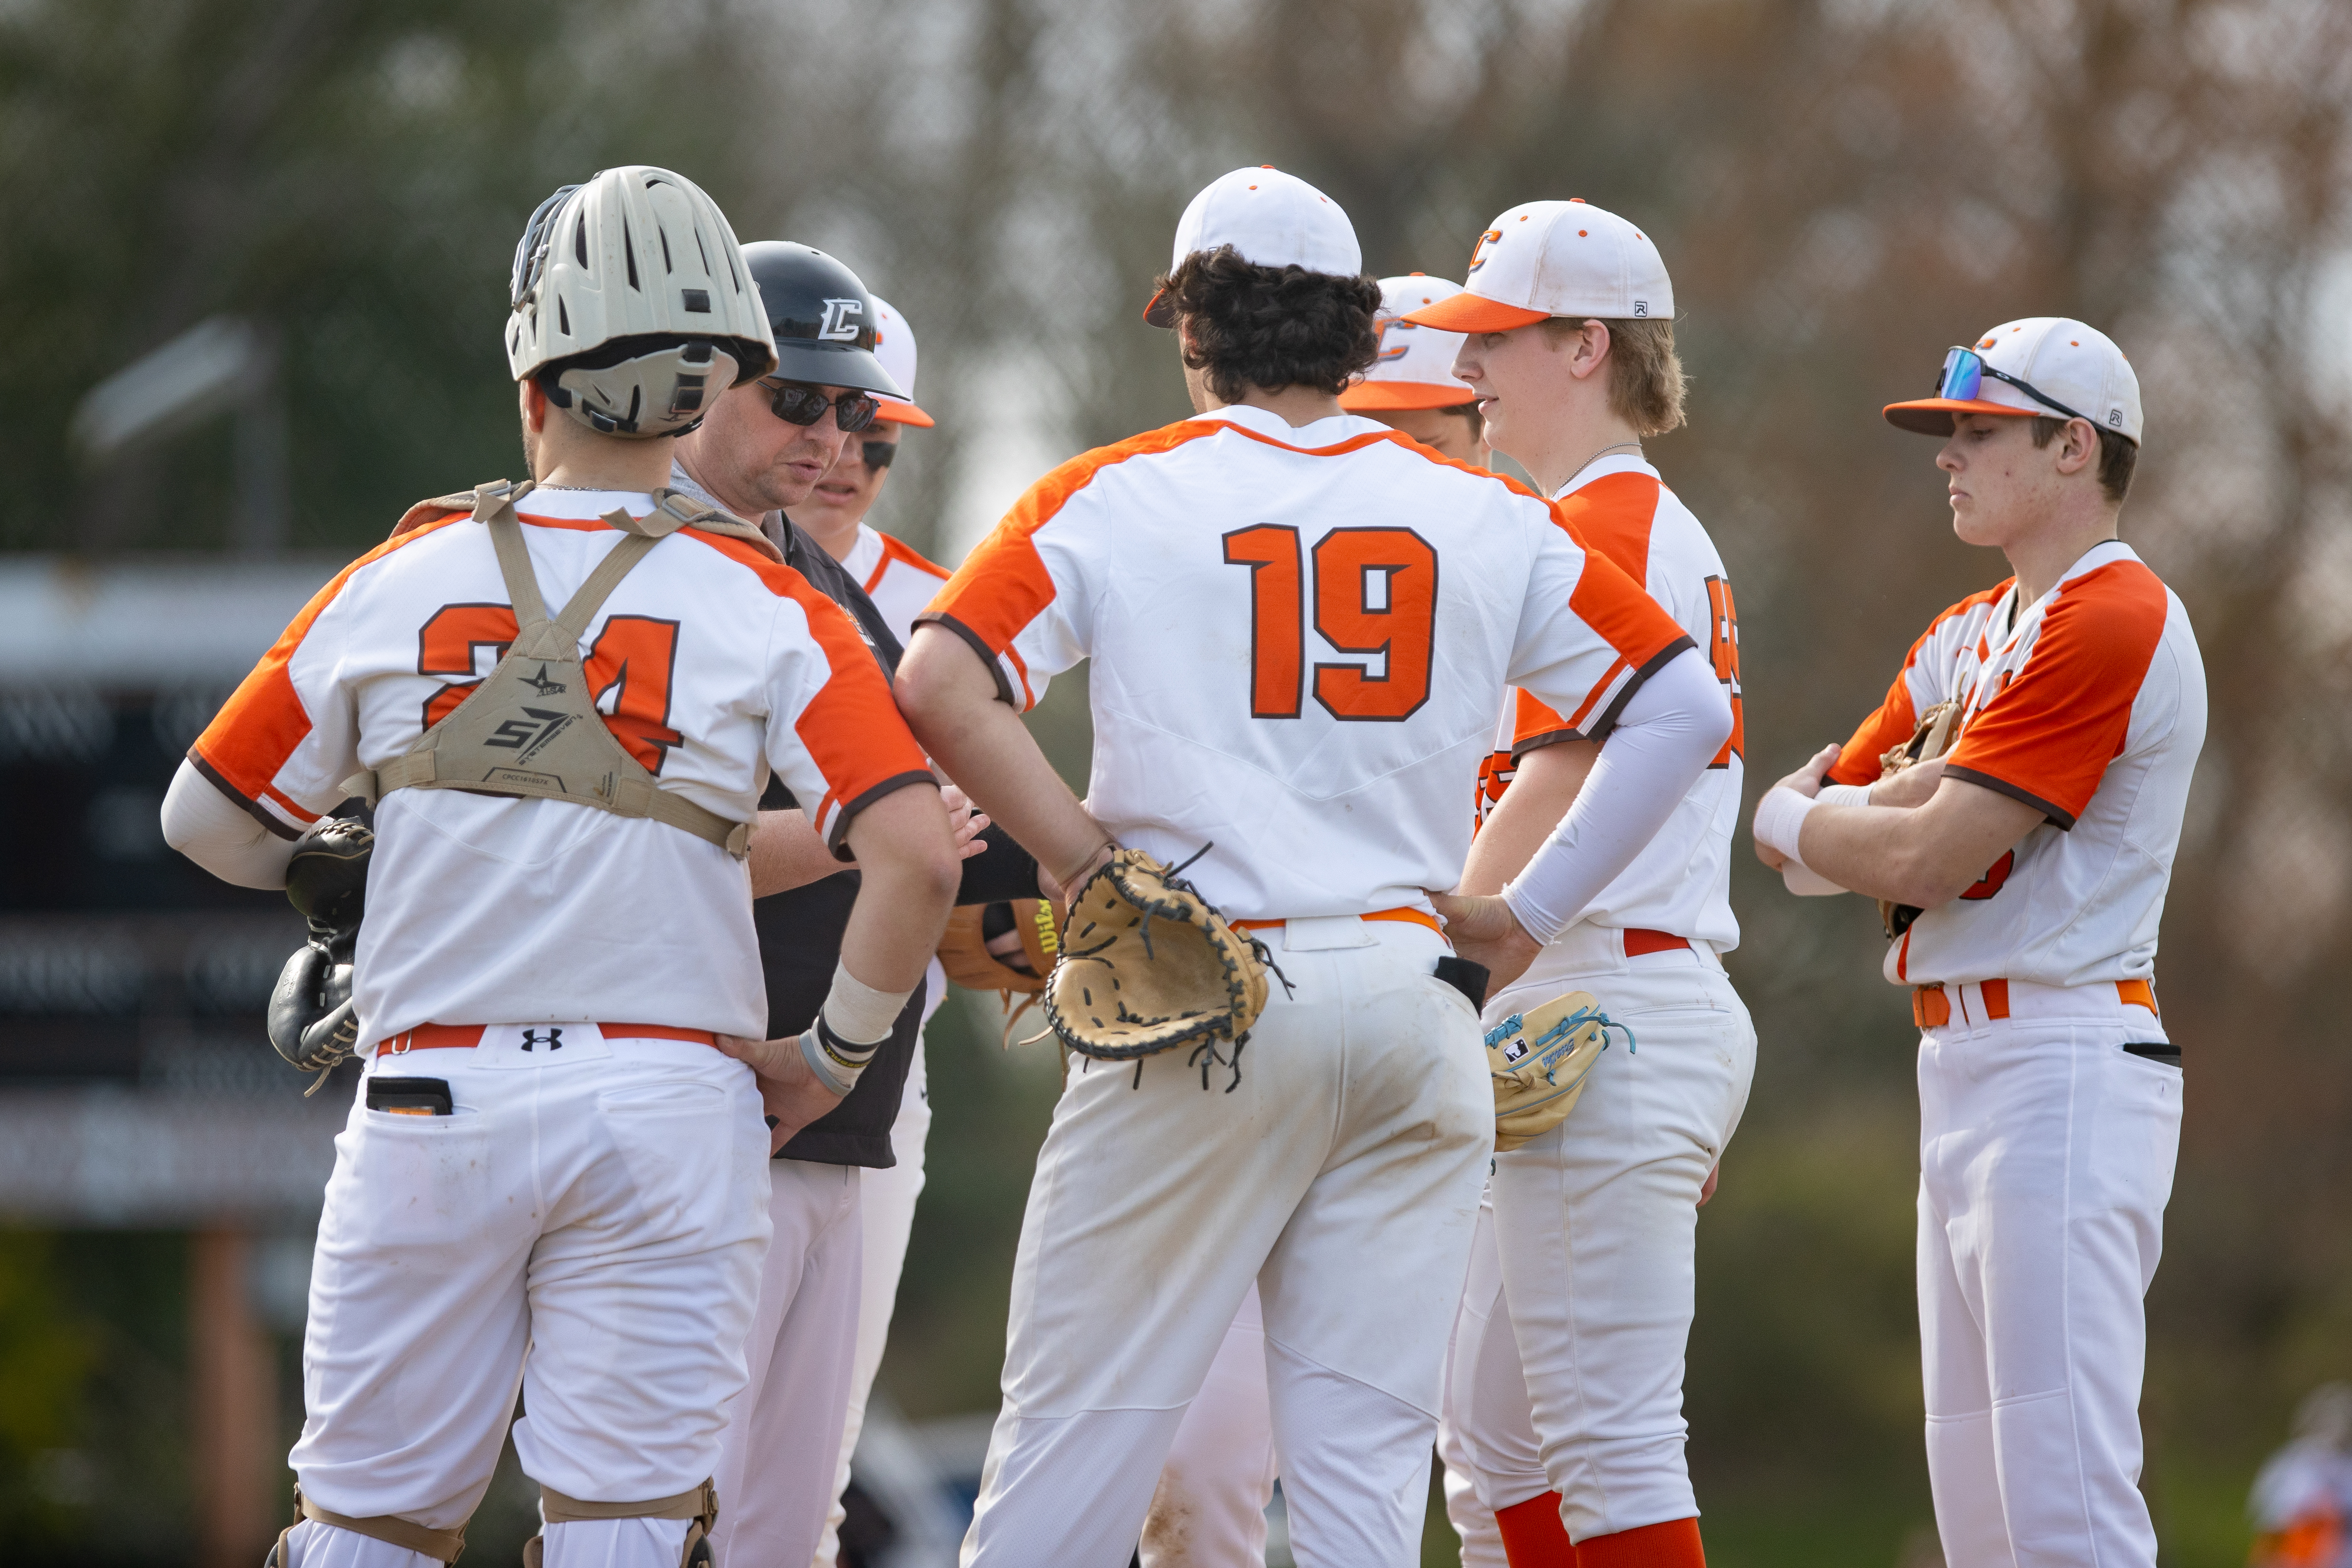 Head Coach Marc Petragnani, of Cherokee, speaks with his pitcher in Marlton, NJ on Monday, April 3, 2023.